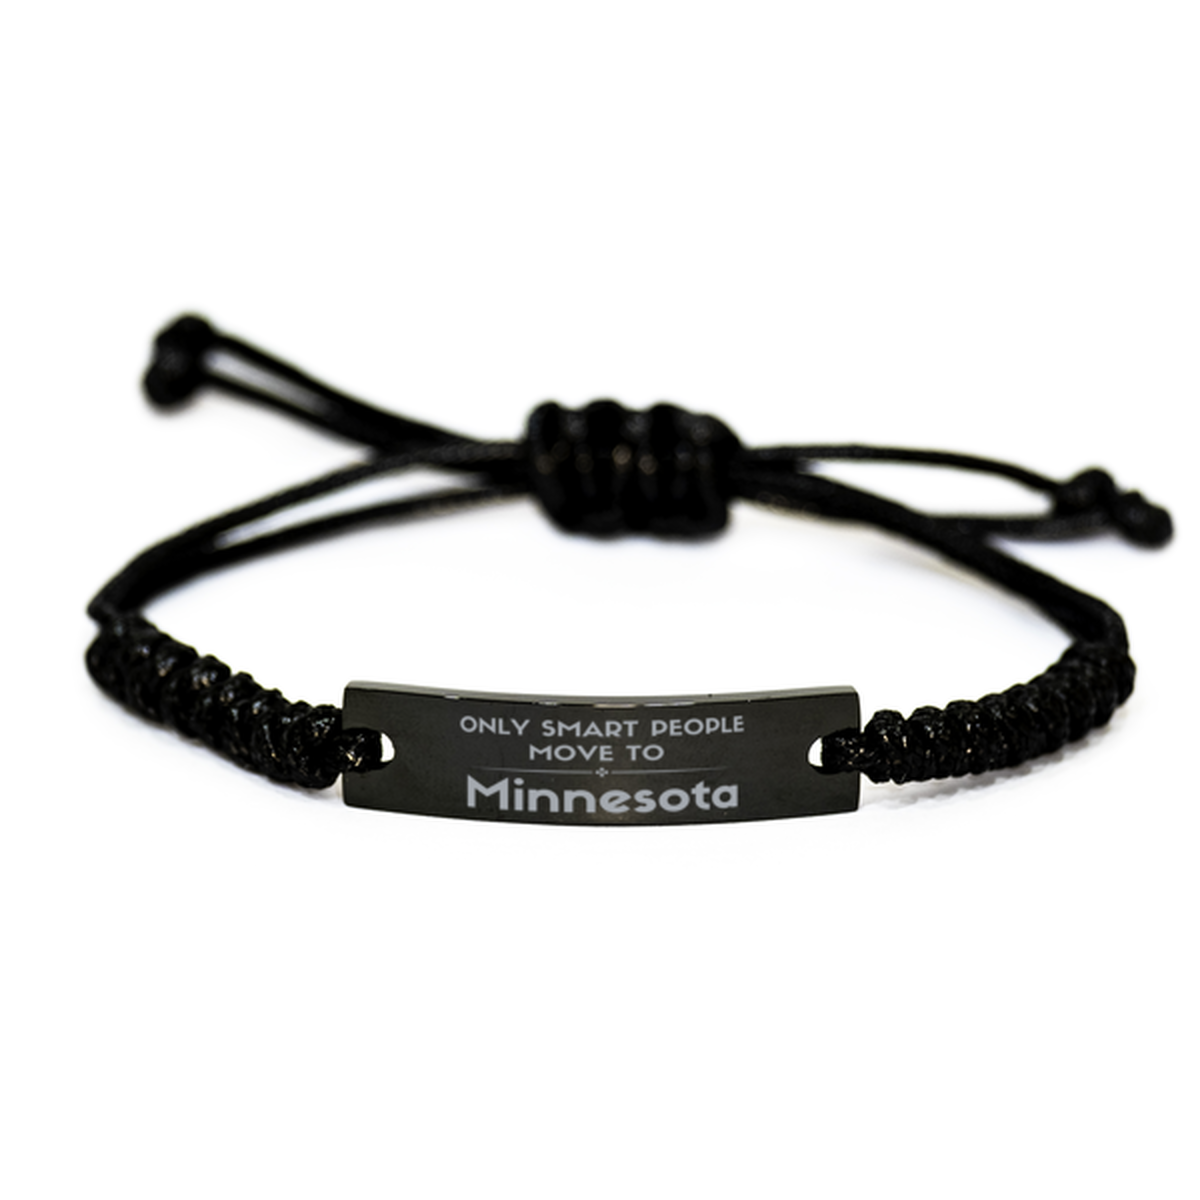 Only smart people move to Minnesota Black Rope Bracelet, Gag Gifts For Minnesota, Move to Minnesota Gifts for Friends Coworker Funny Saying Quote